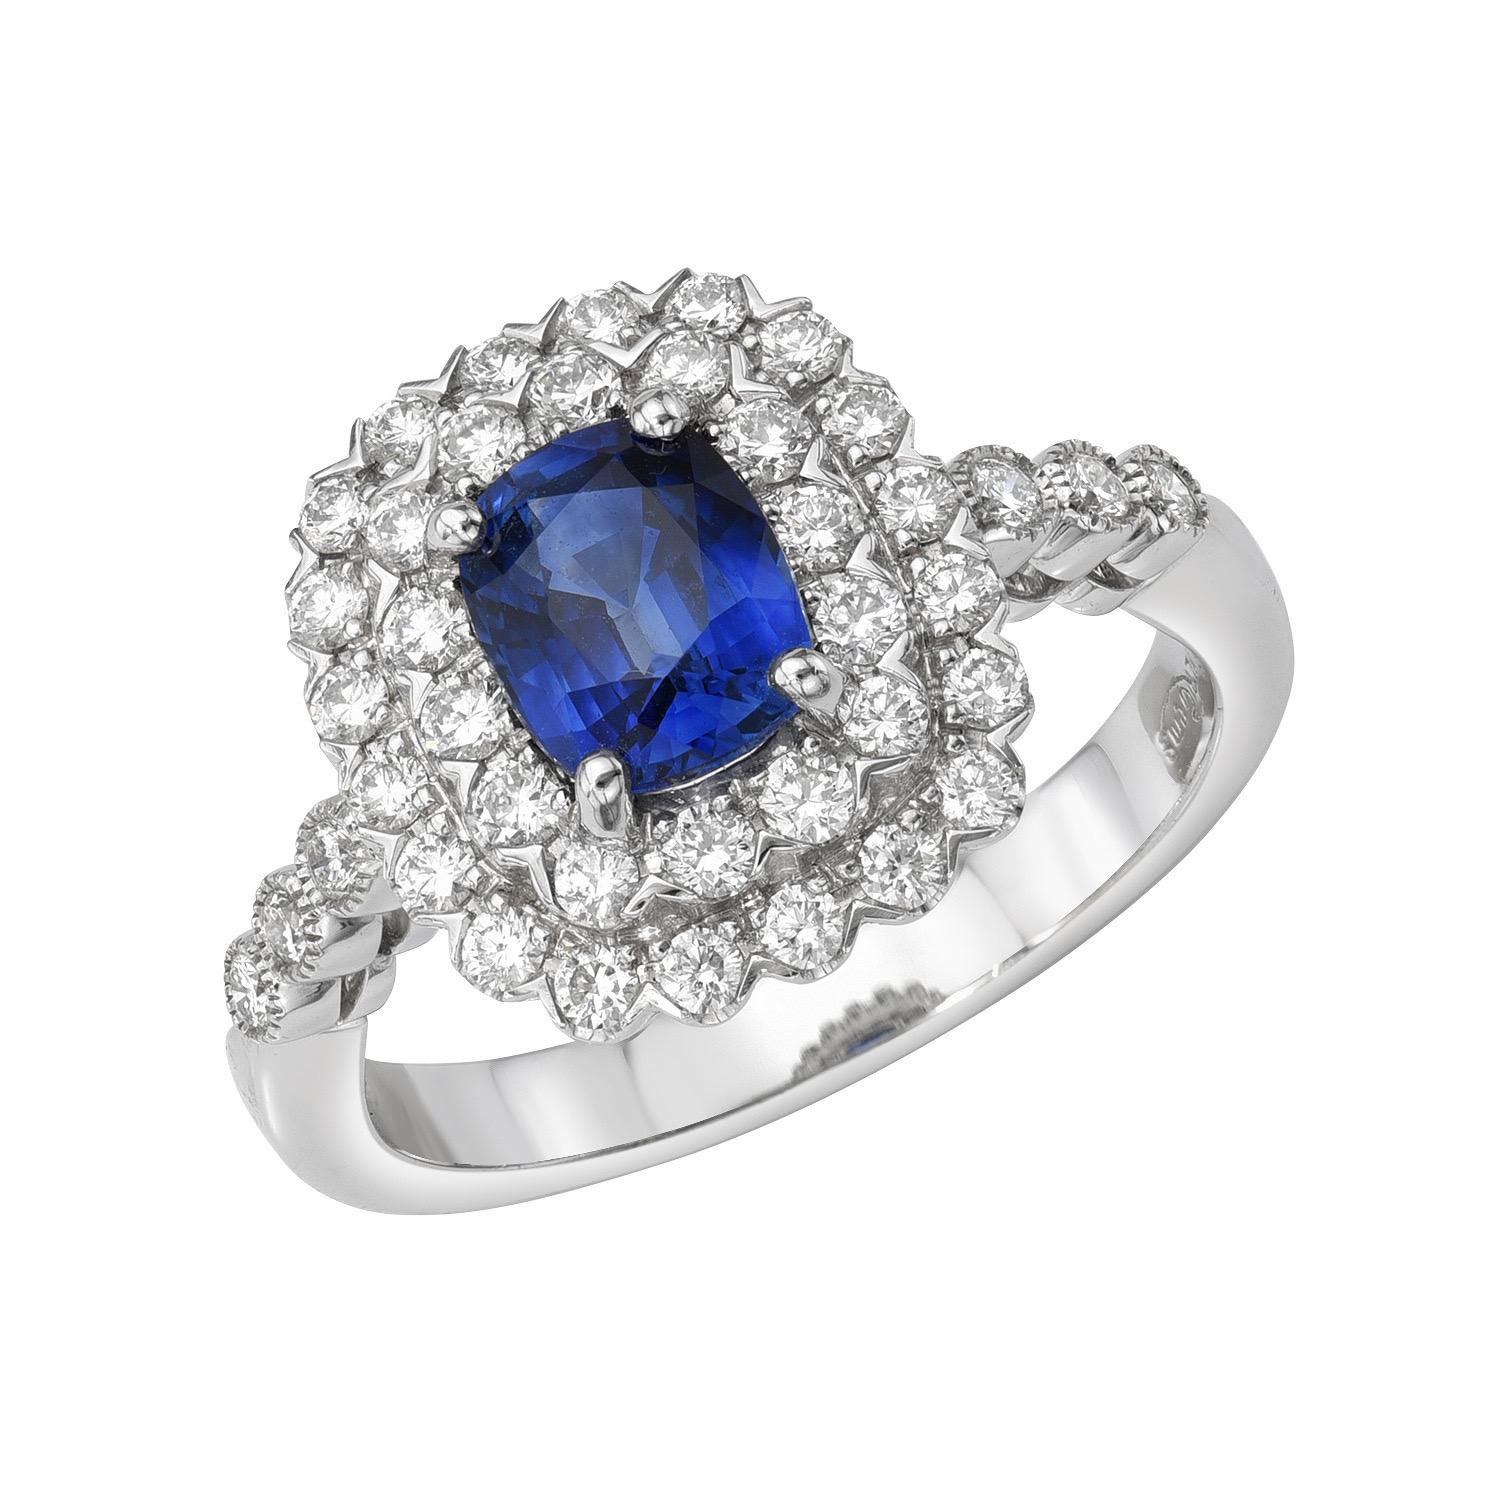 Contemporary Blue Sapphire Ring 1.34 Carat Cushion For Sale